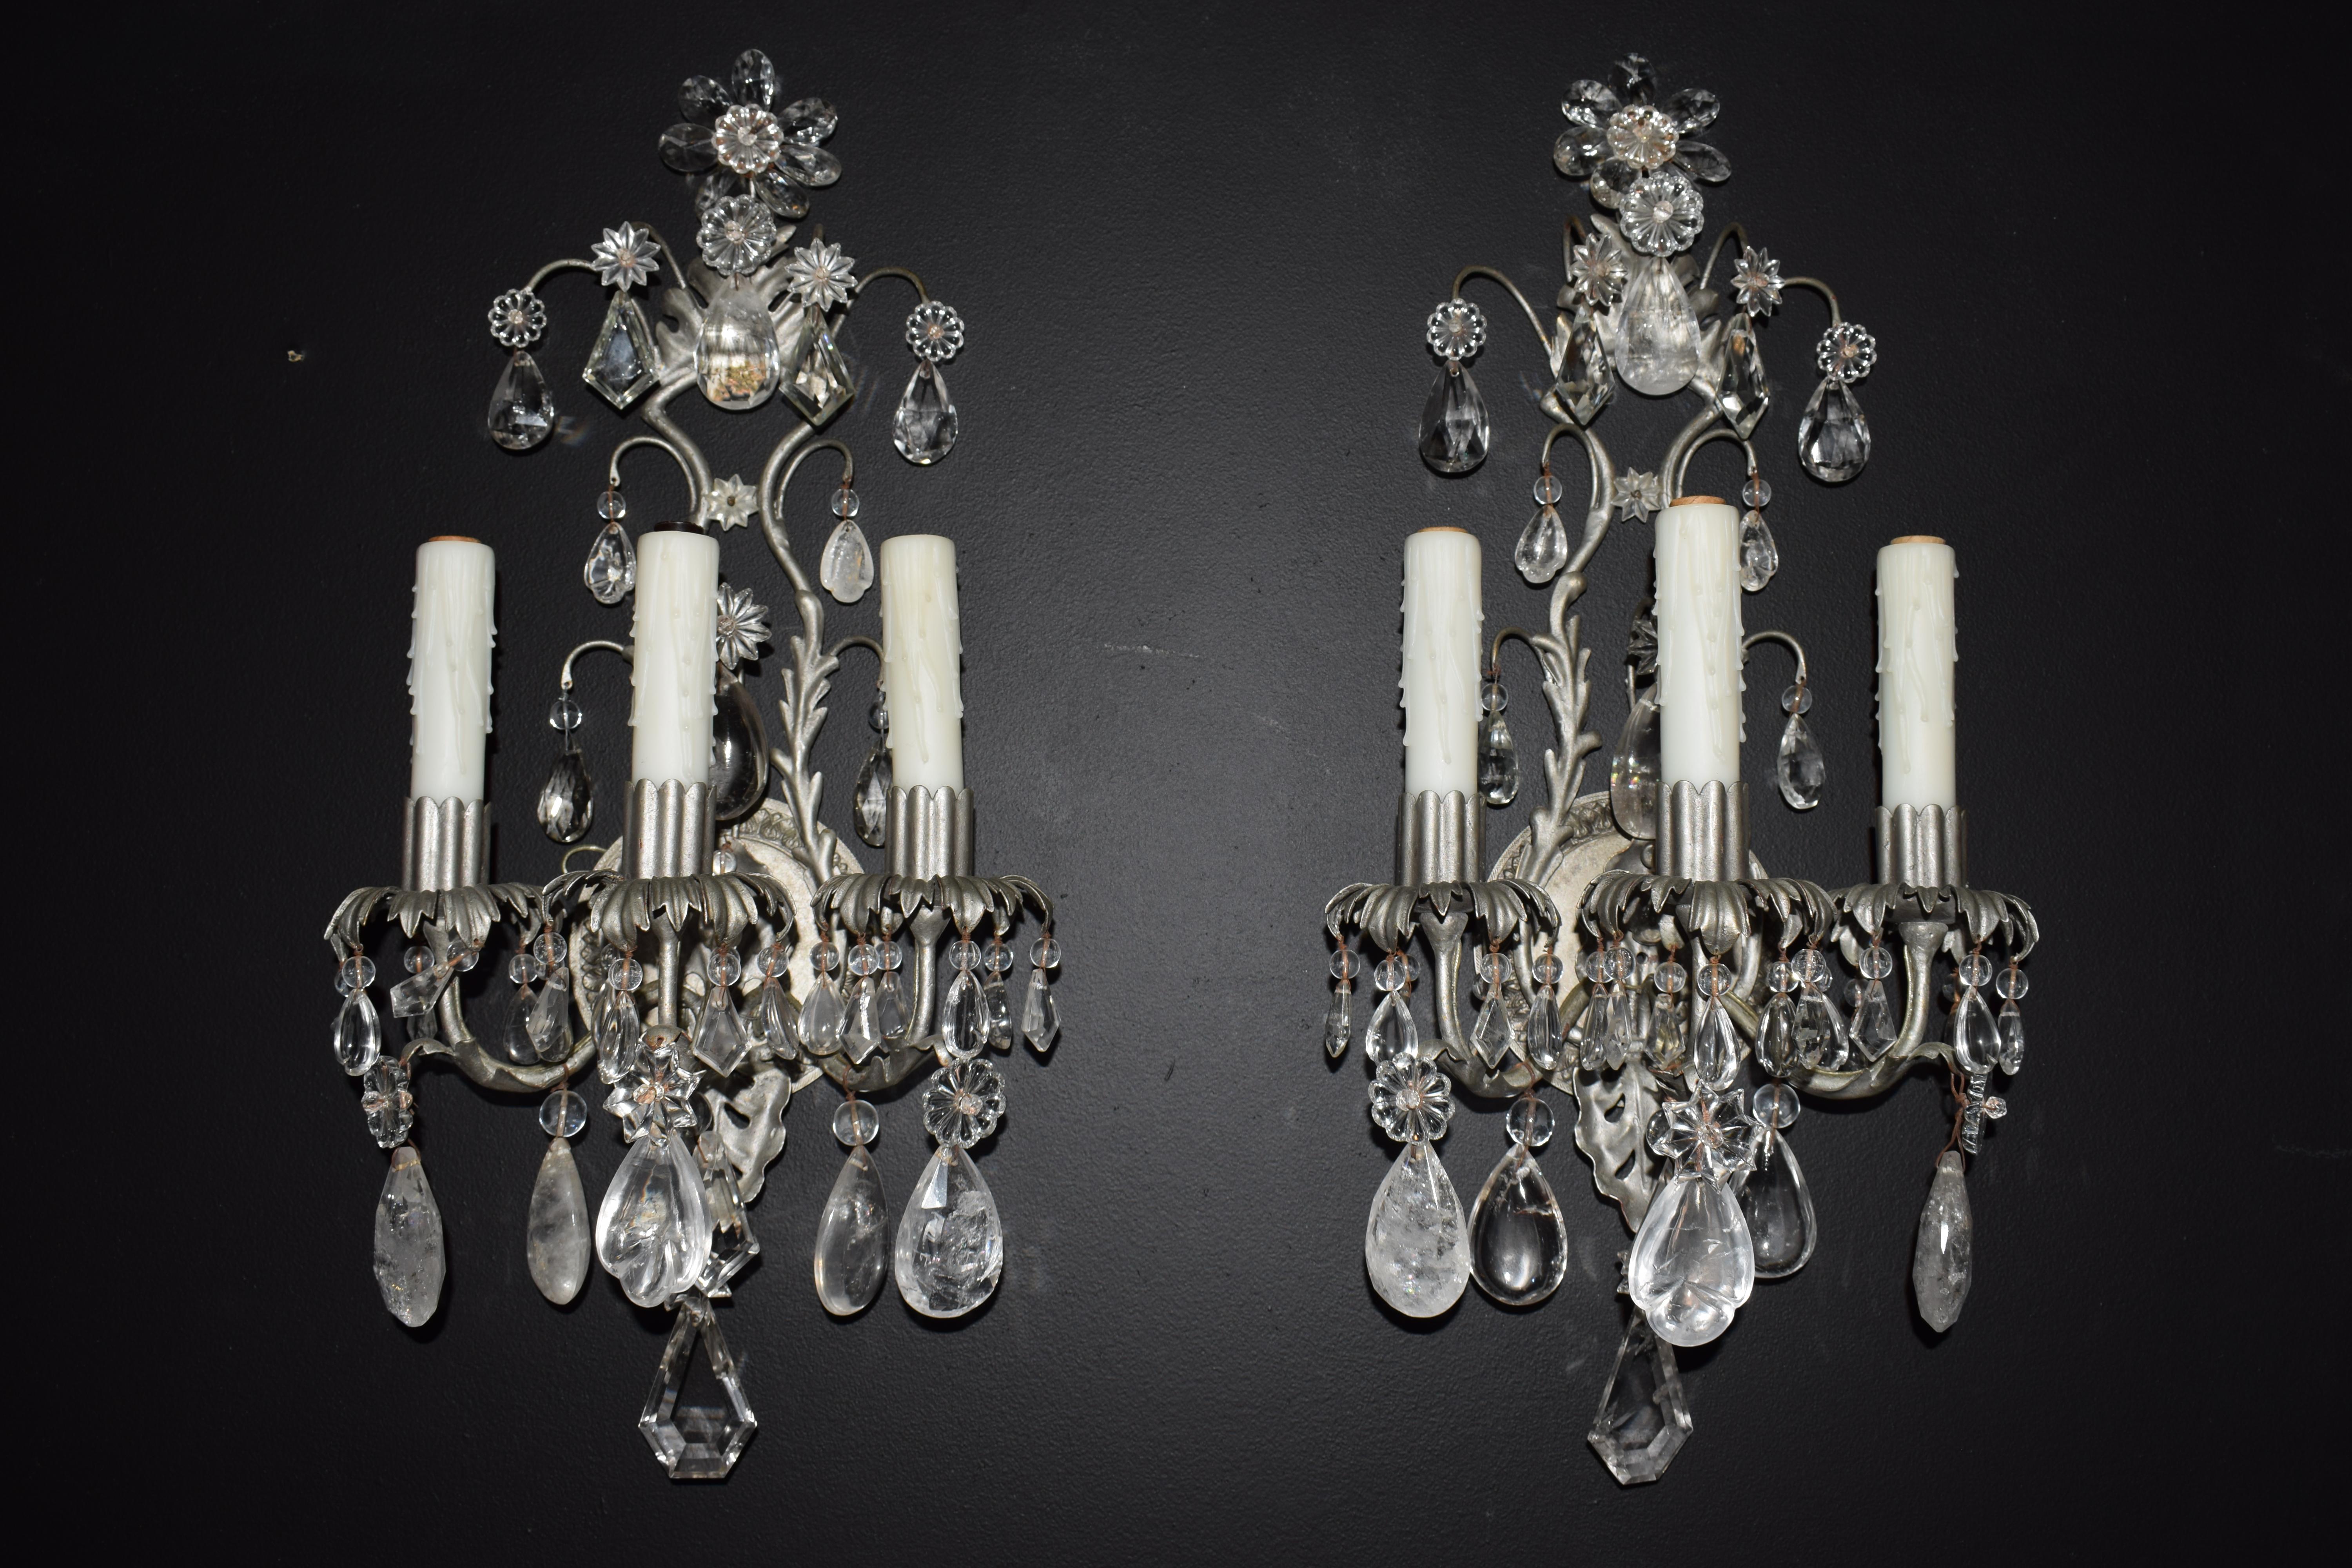 A Fine pair of silvered, crystal and rock crystal wall sconces.
France, circa 1940. 3 lights
Dimensions: Height 23